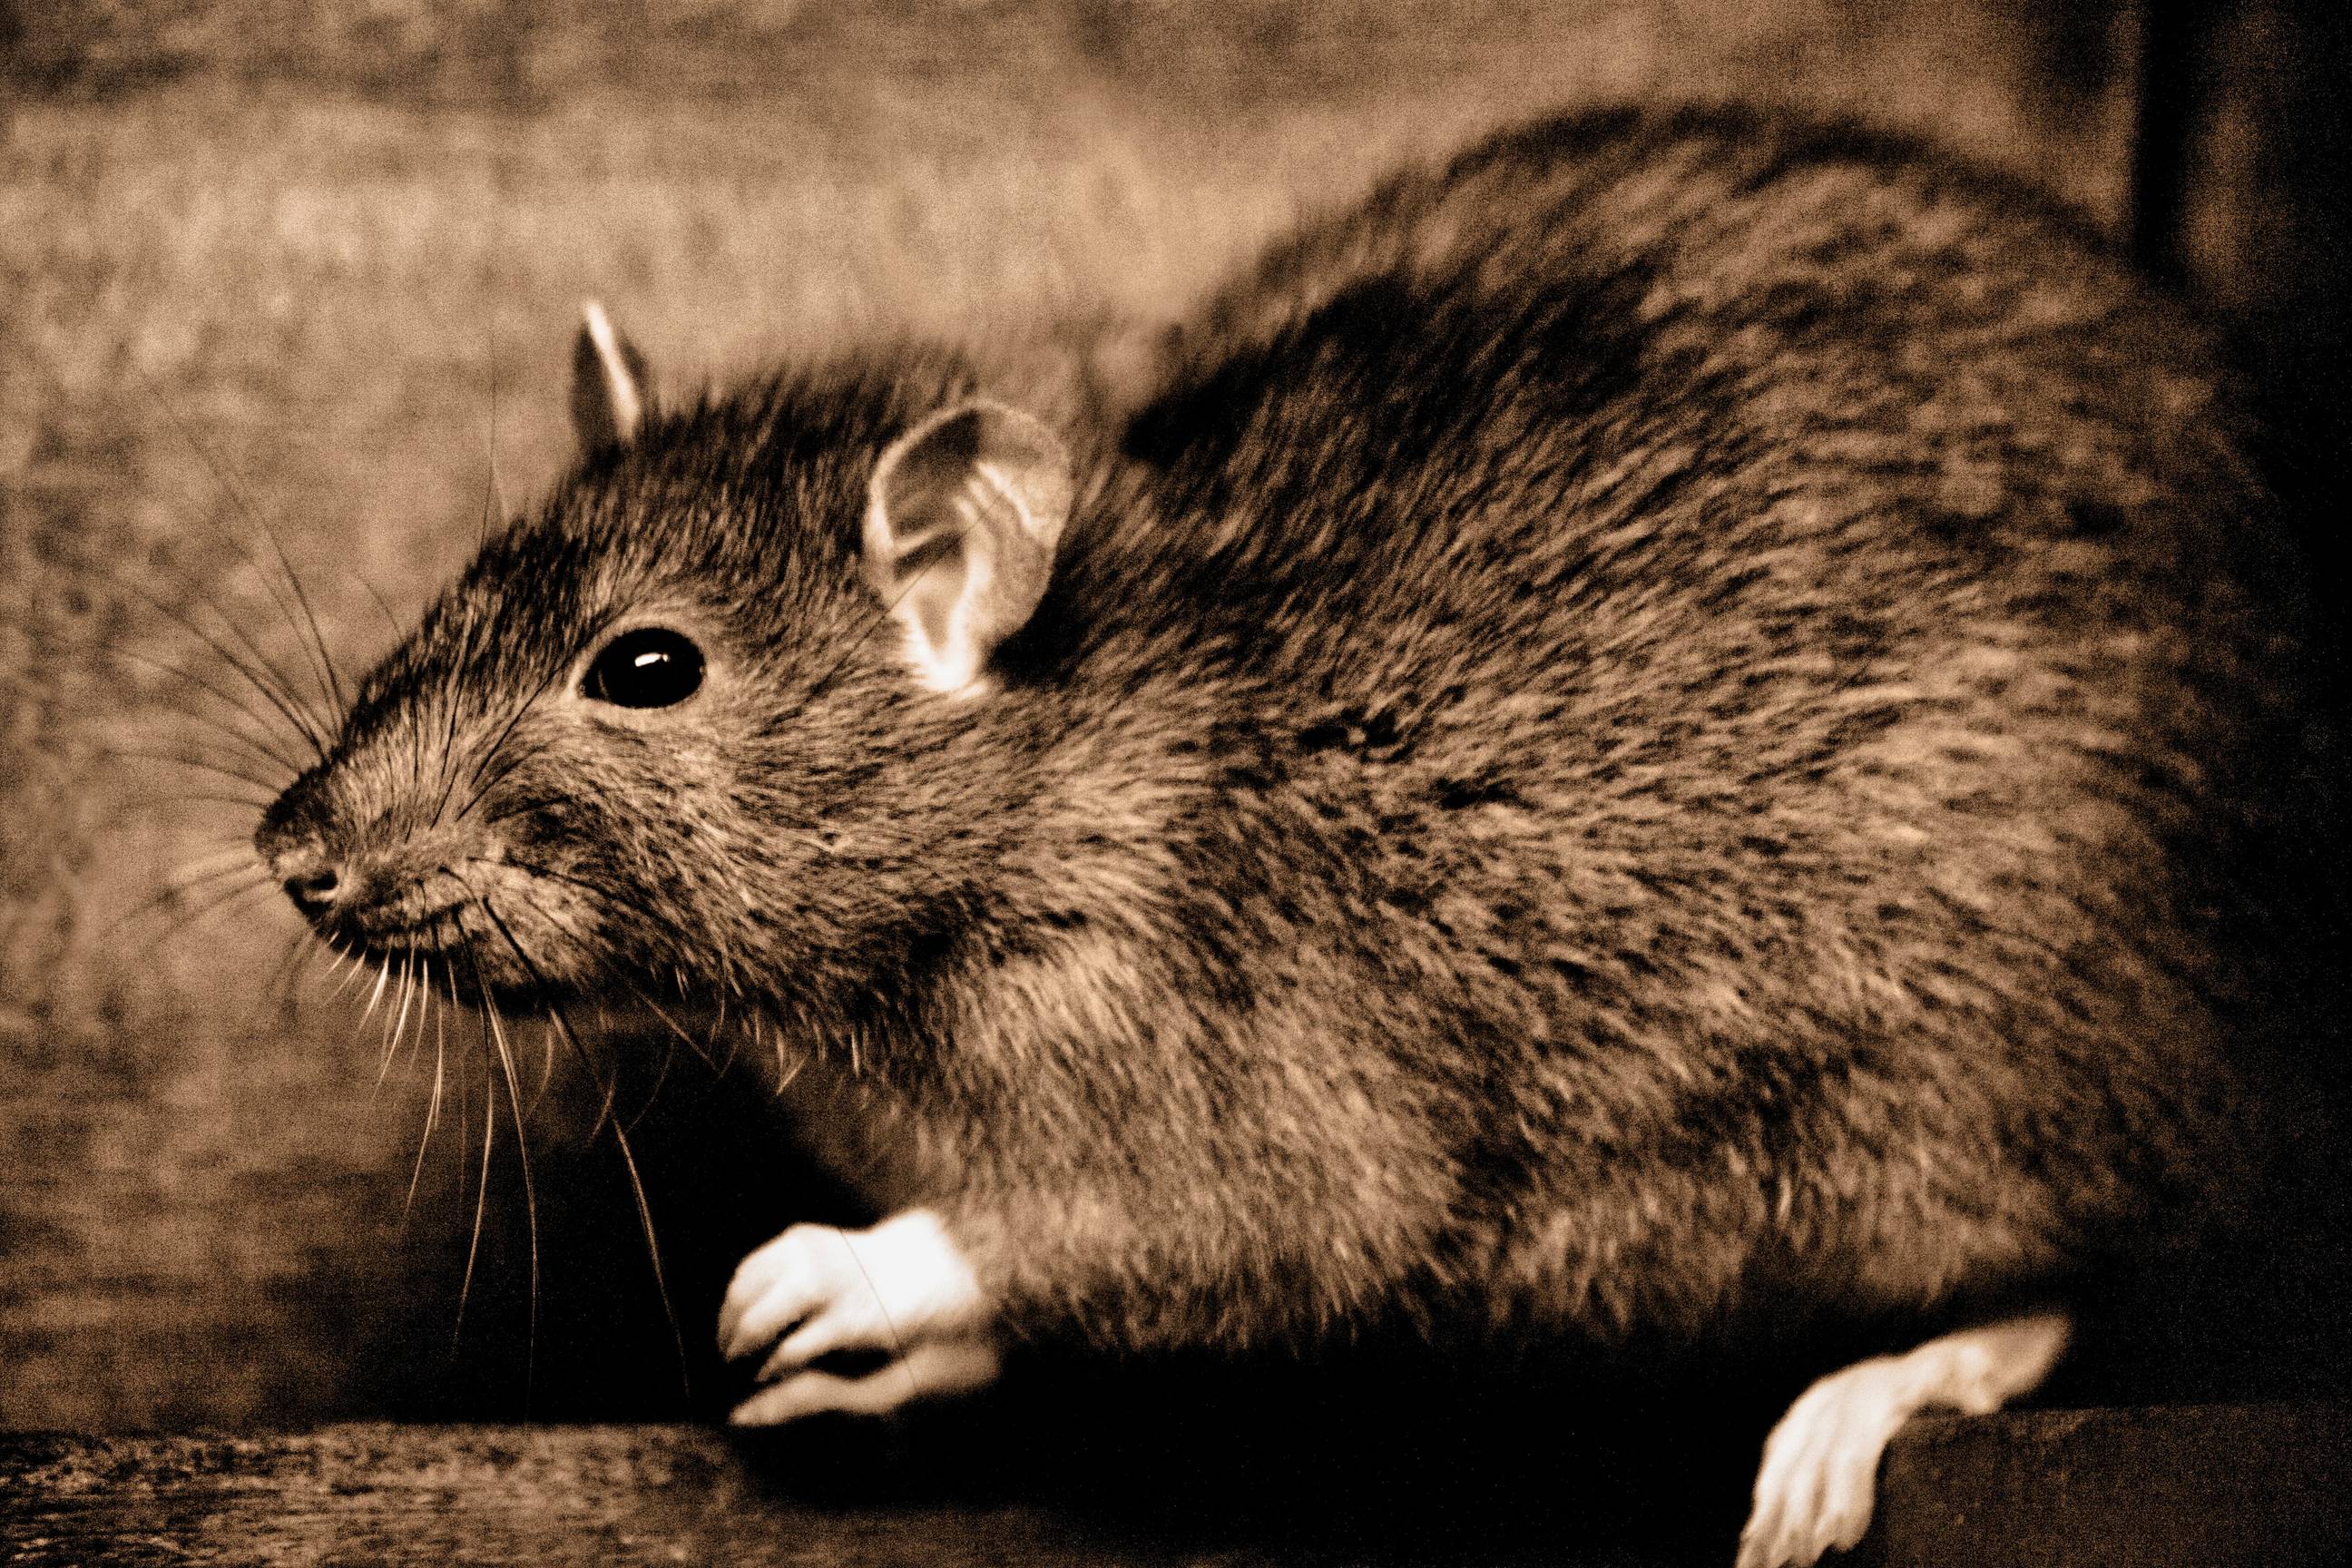 rodent extermination & control in New York City